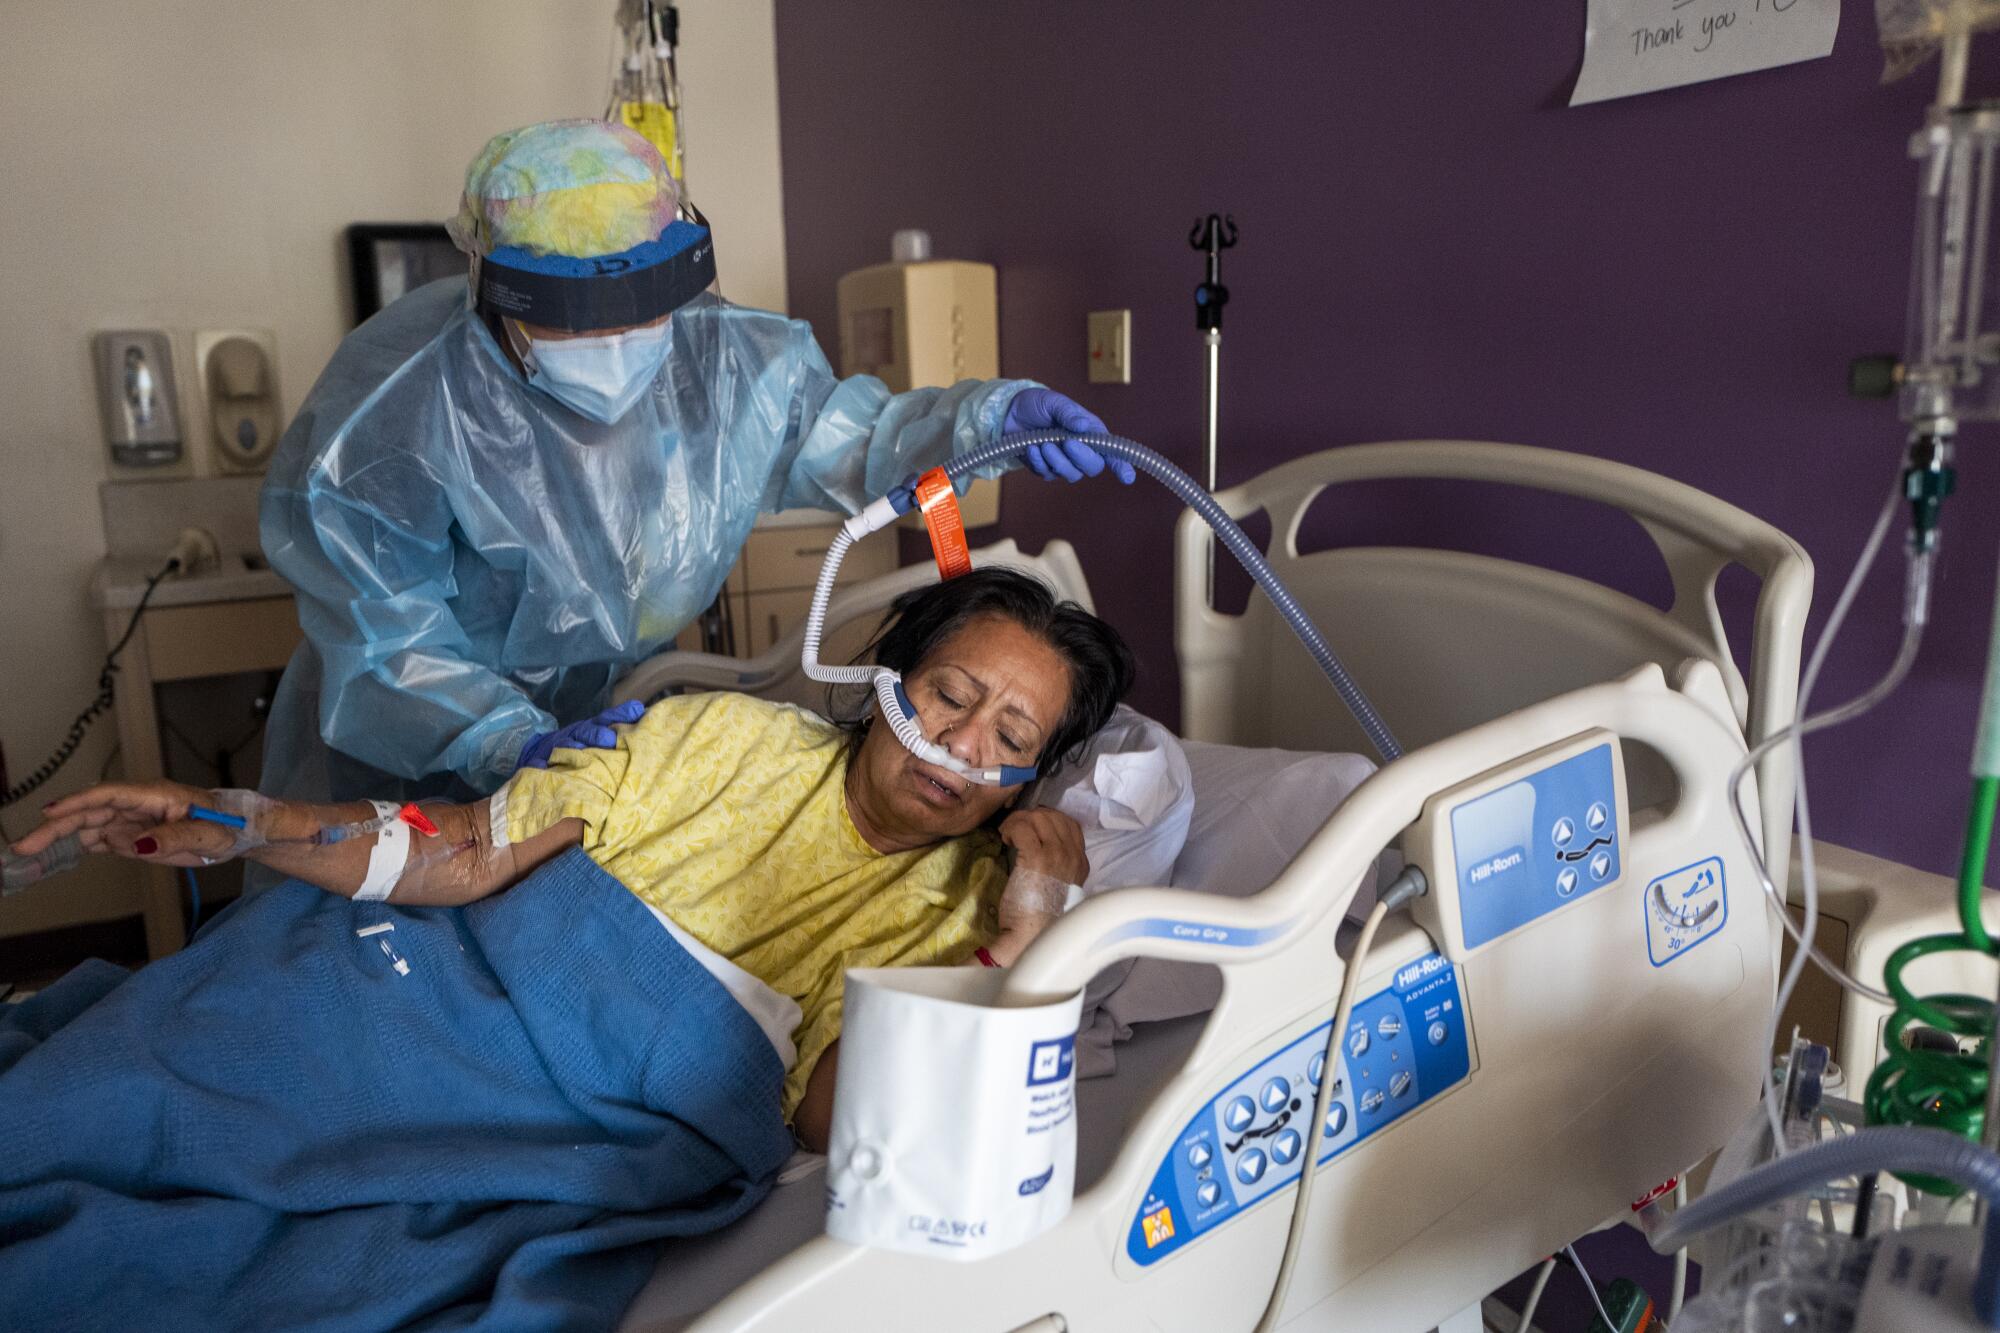 A healthcare worker in personal protective equipment helps a COVID-19 patient with equipment in bed.